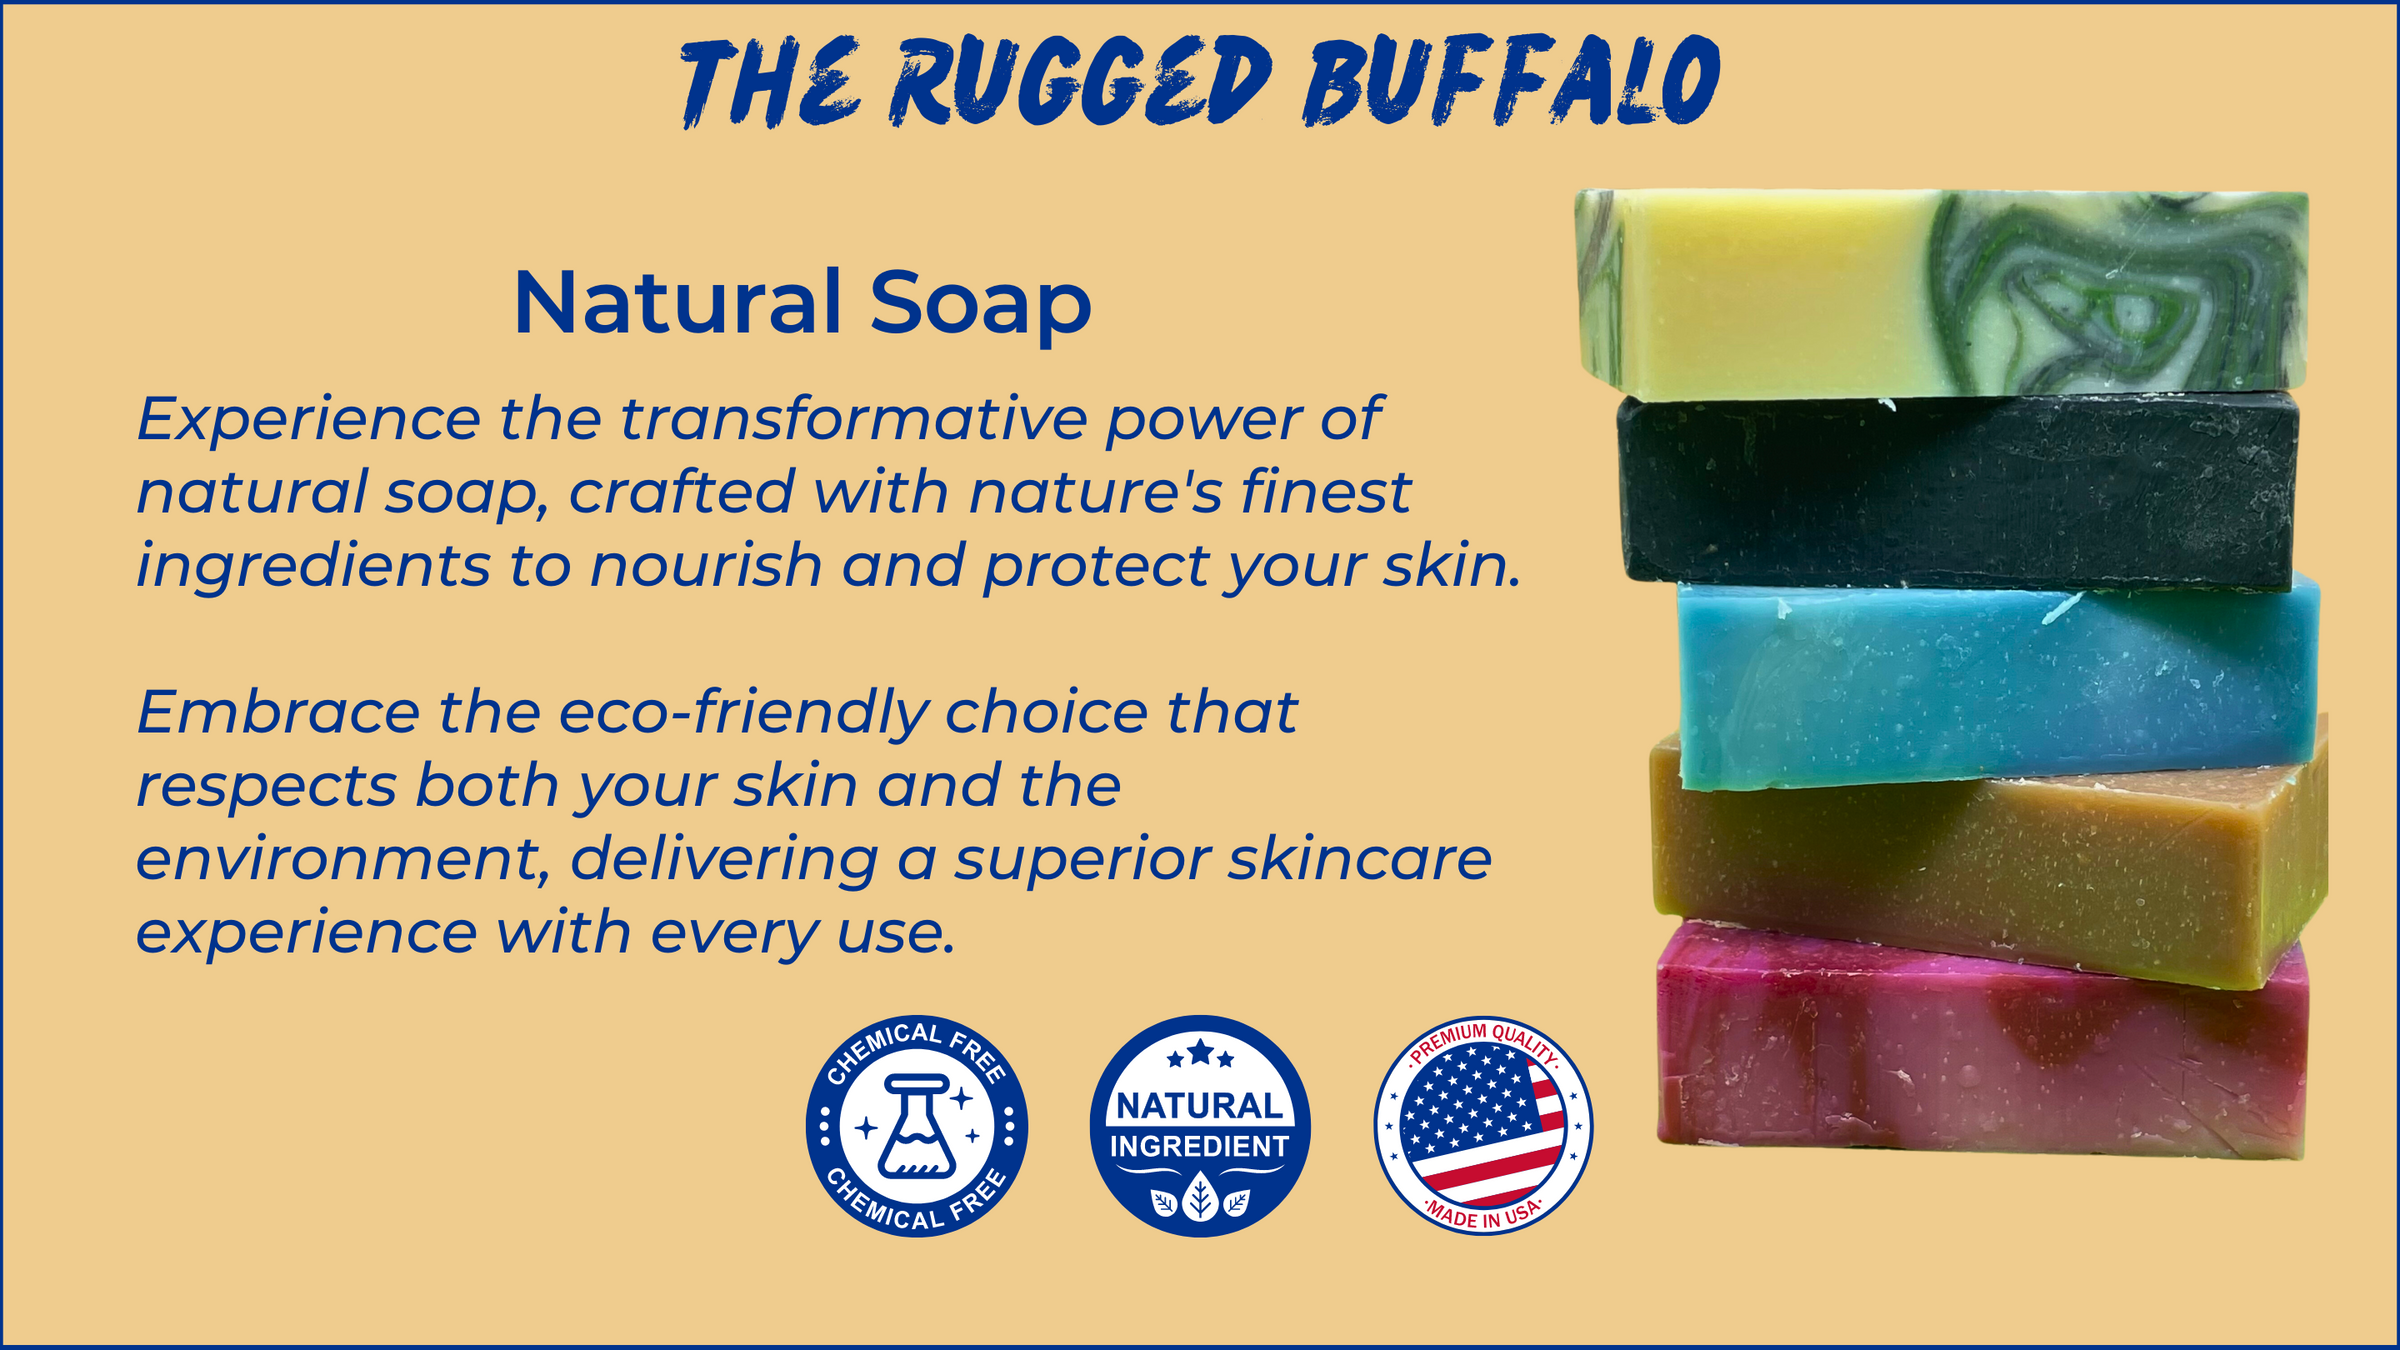 Hero image presenting 'The Rugged Buffalo' collection, a unique buffalo gift of natural men's soap, made in America and capturing the essence of buffalo soap.